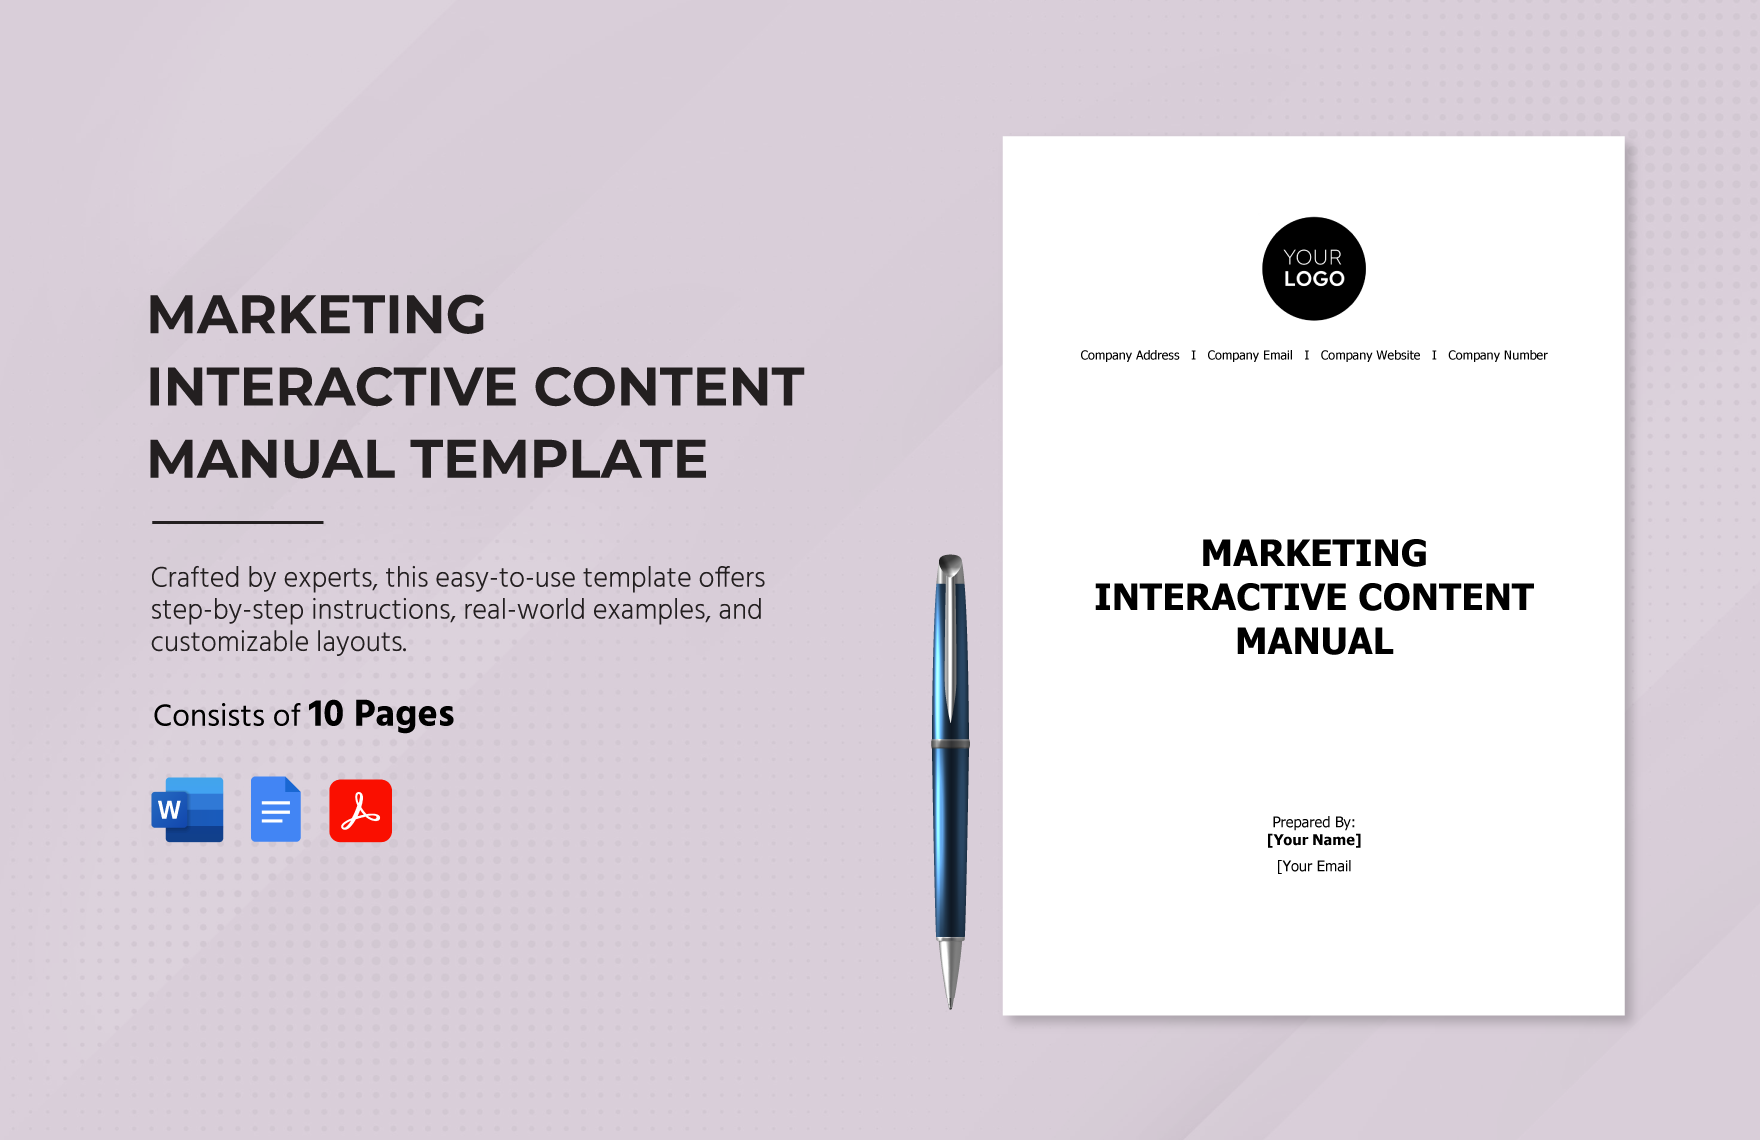 Marketing Interactive Content Manual Template